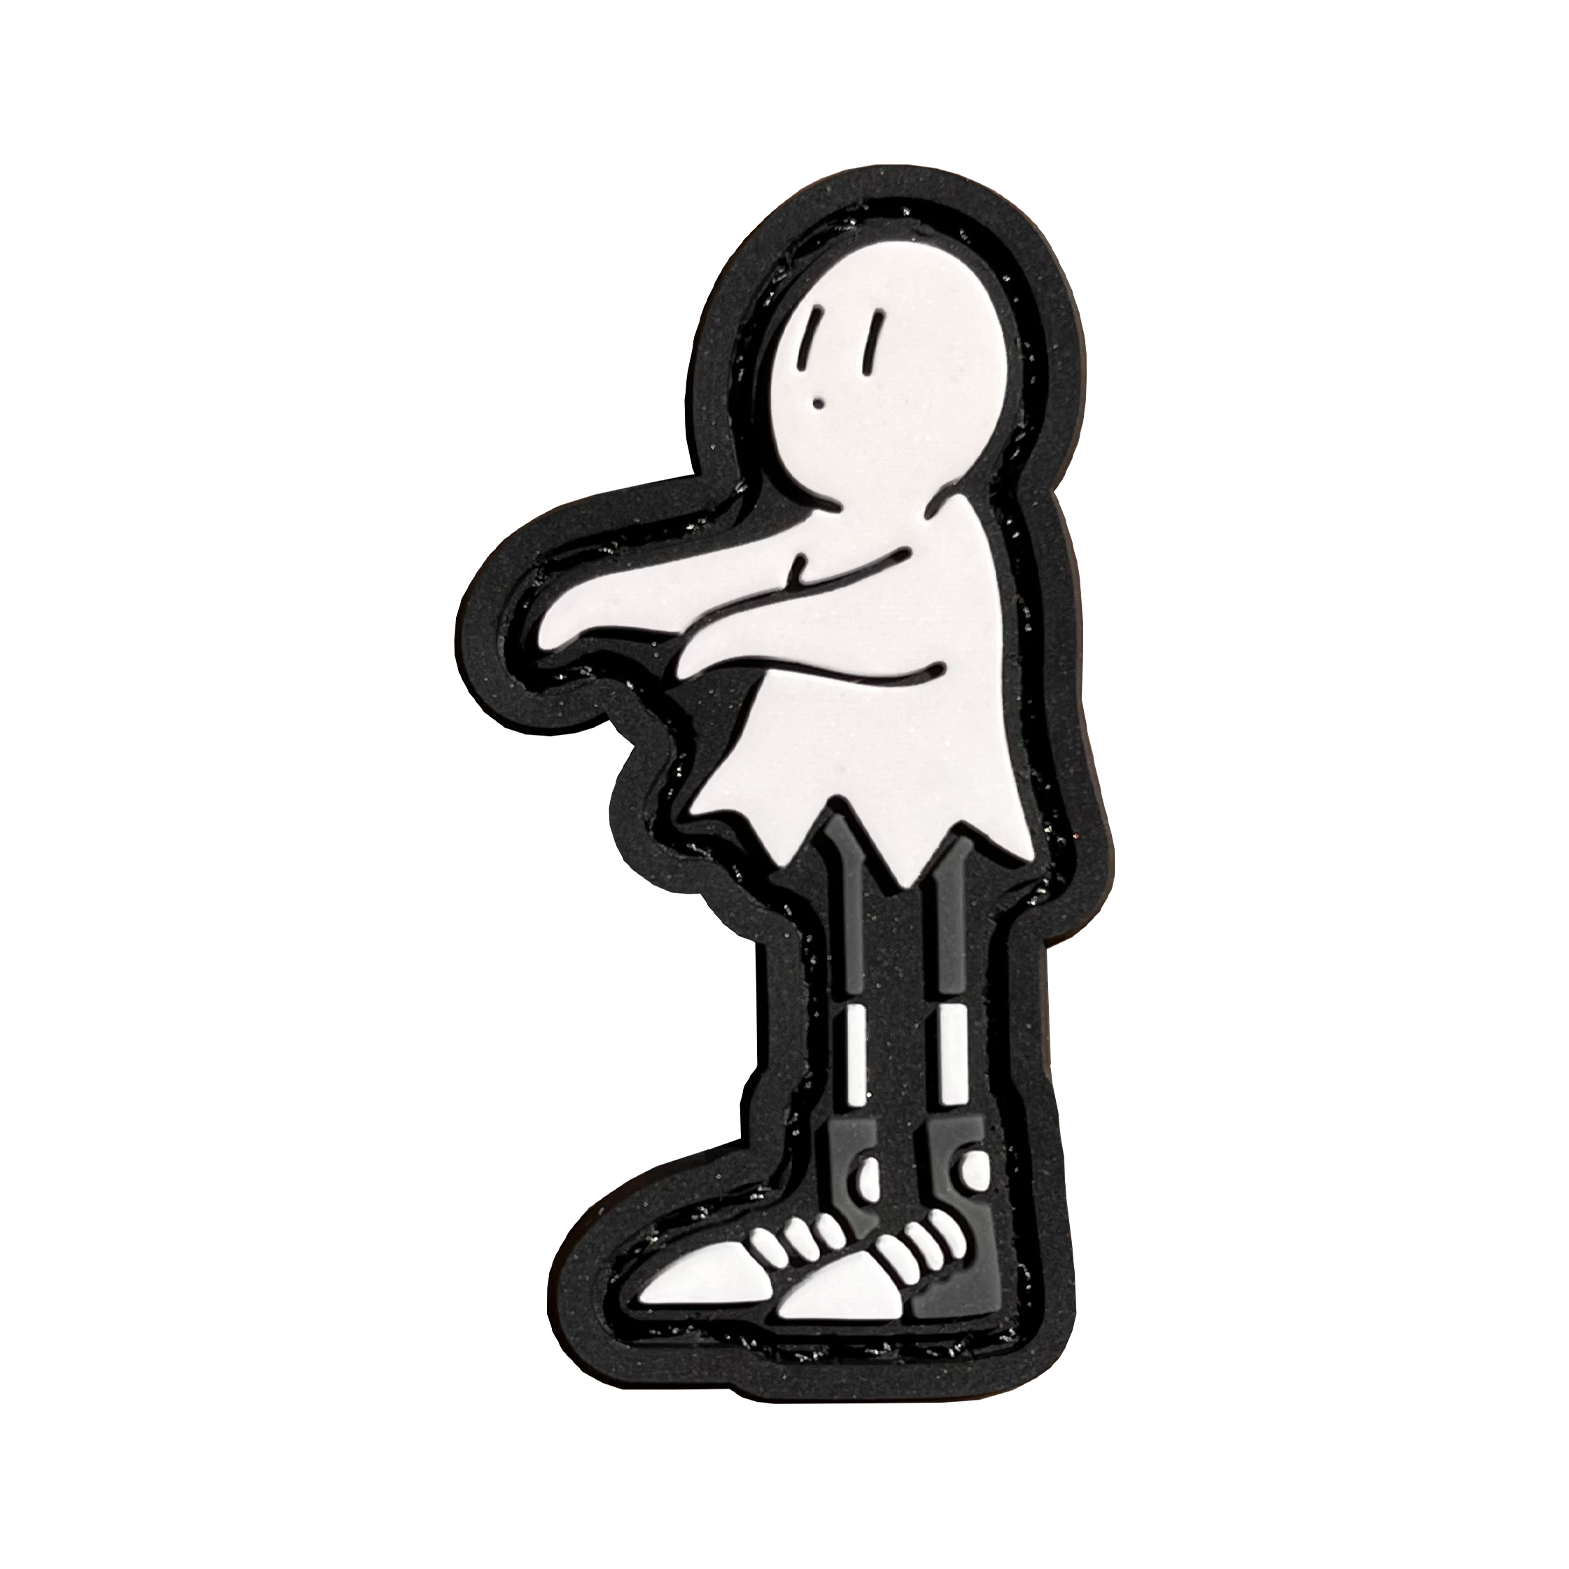  A playful cartoon character wearing high-top shoes, draping a white sheet over their head like a ghost costume, extending their arms outward, and gazing to the left.